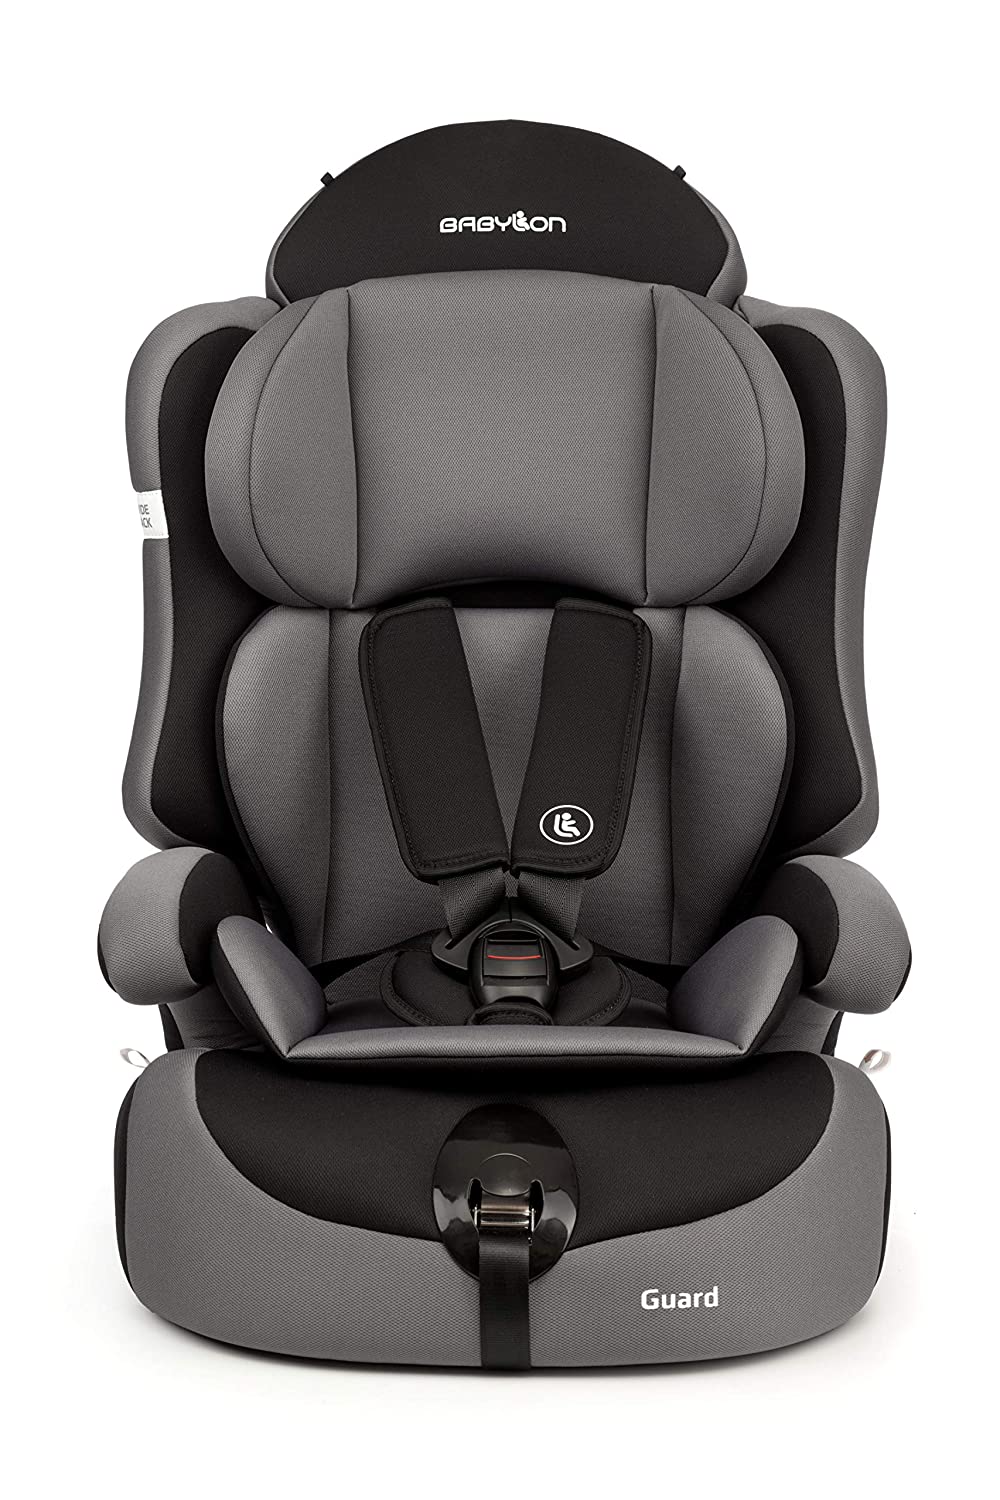 Babylon Guard Child Car Seat Group 1/2/3, 9-36 kg Child Seat with Top Tether 5 Point Seat Belt Car Seat Adjustable Headrest ECE R44/04 Grey